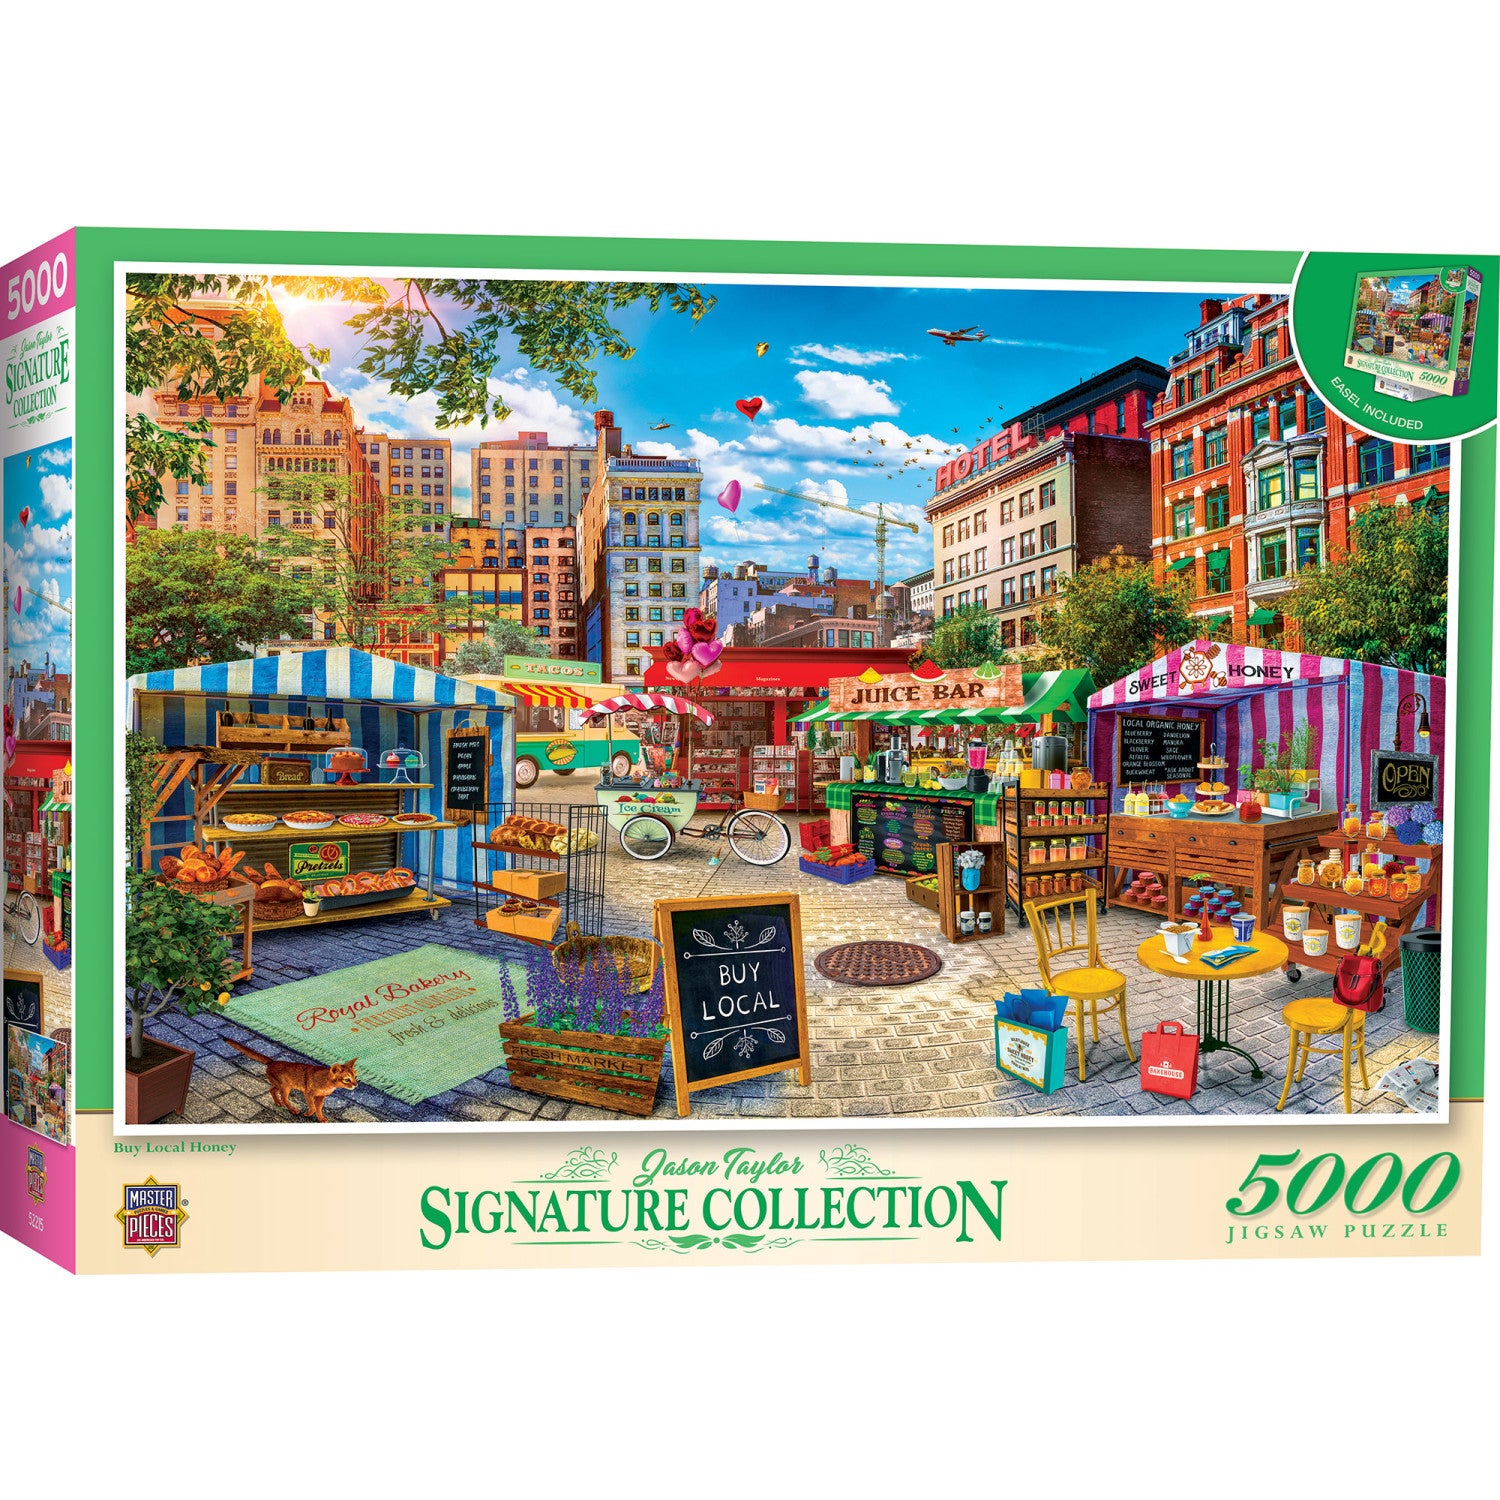 Signature Collection - Buy Local Honey 5000 Piece Jigsaw Puzzle - Flawed